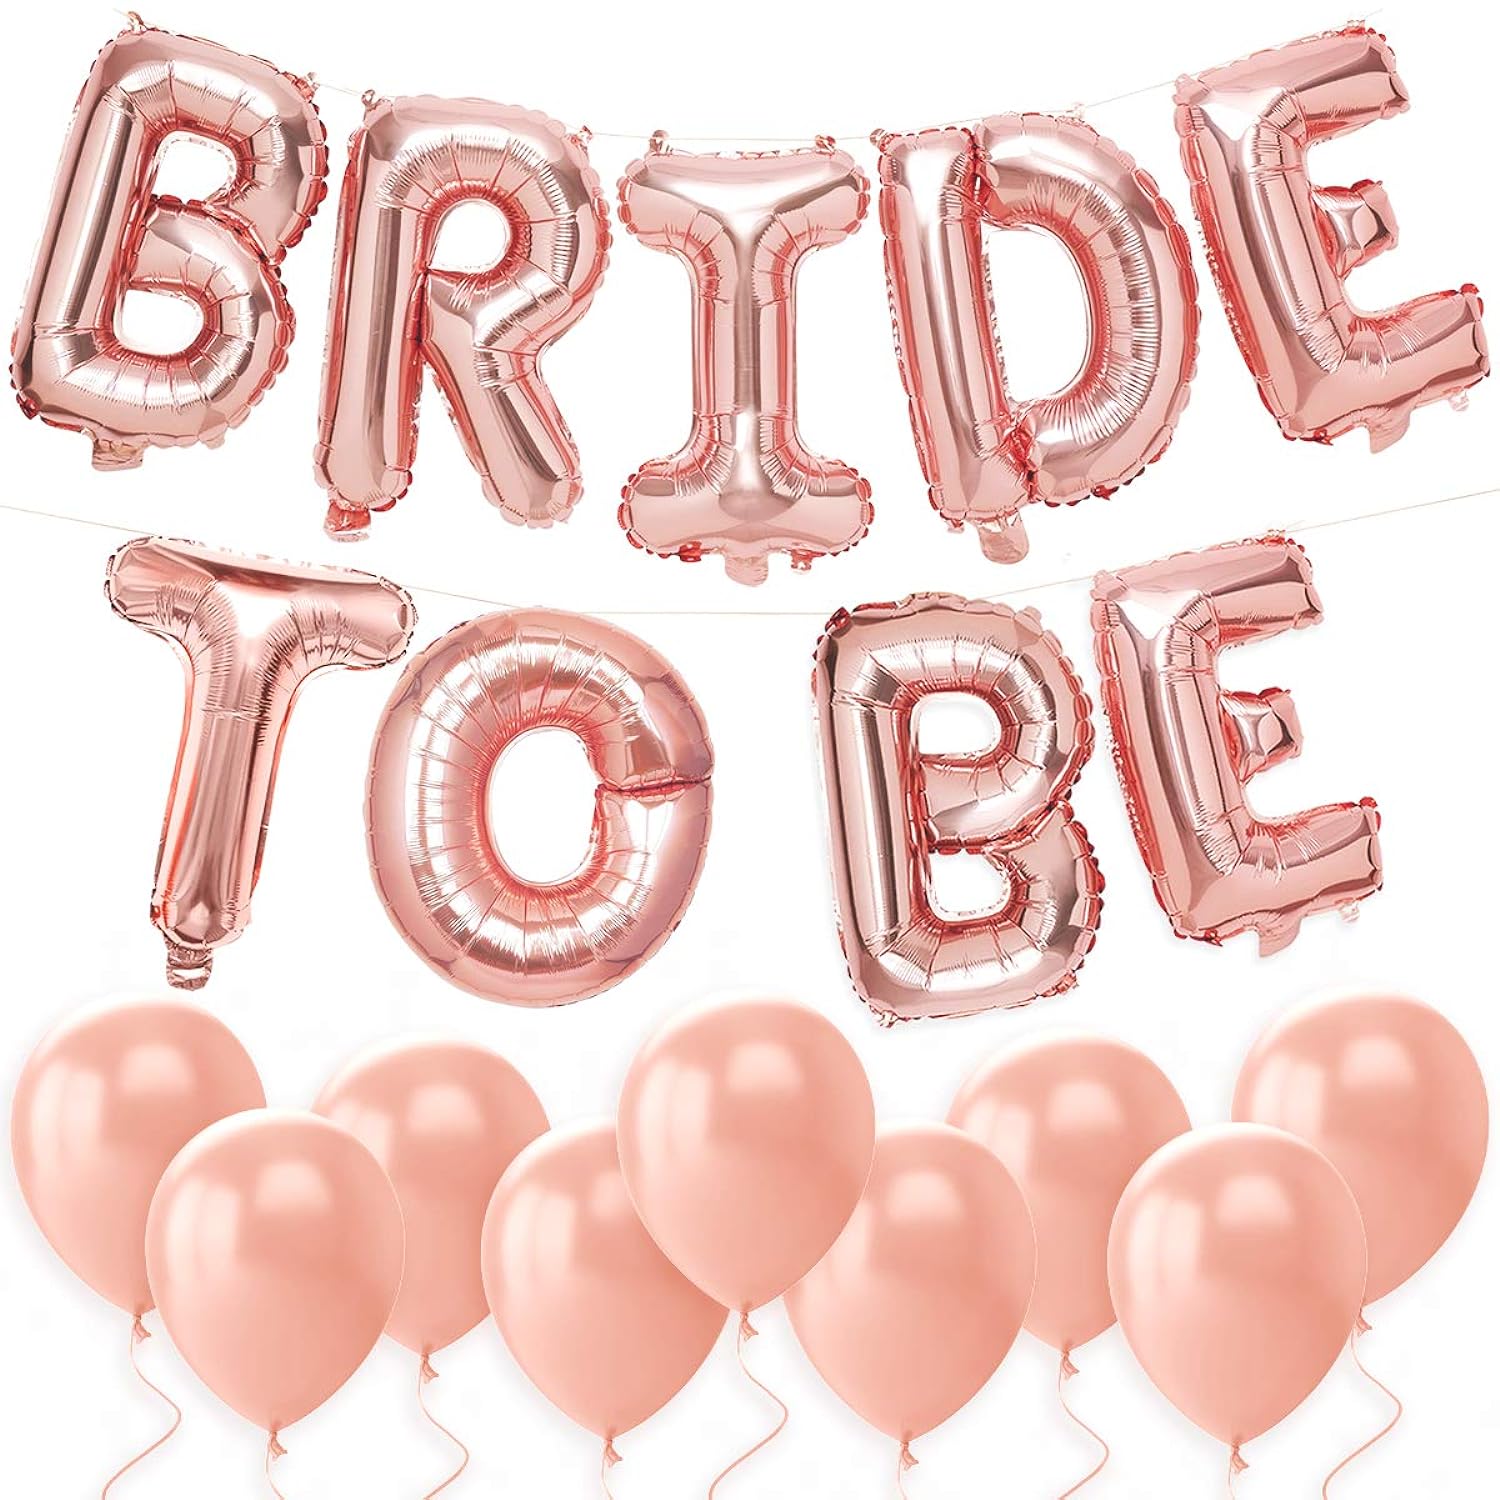 EBD Products Bachelorette Party Decorations - Bride To Be Balloon Kit - Rose Gold - 16" Bride To Be Foil Balloons SEA8190436